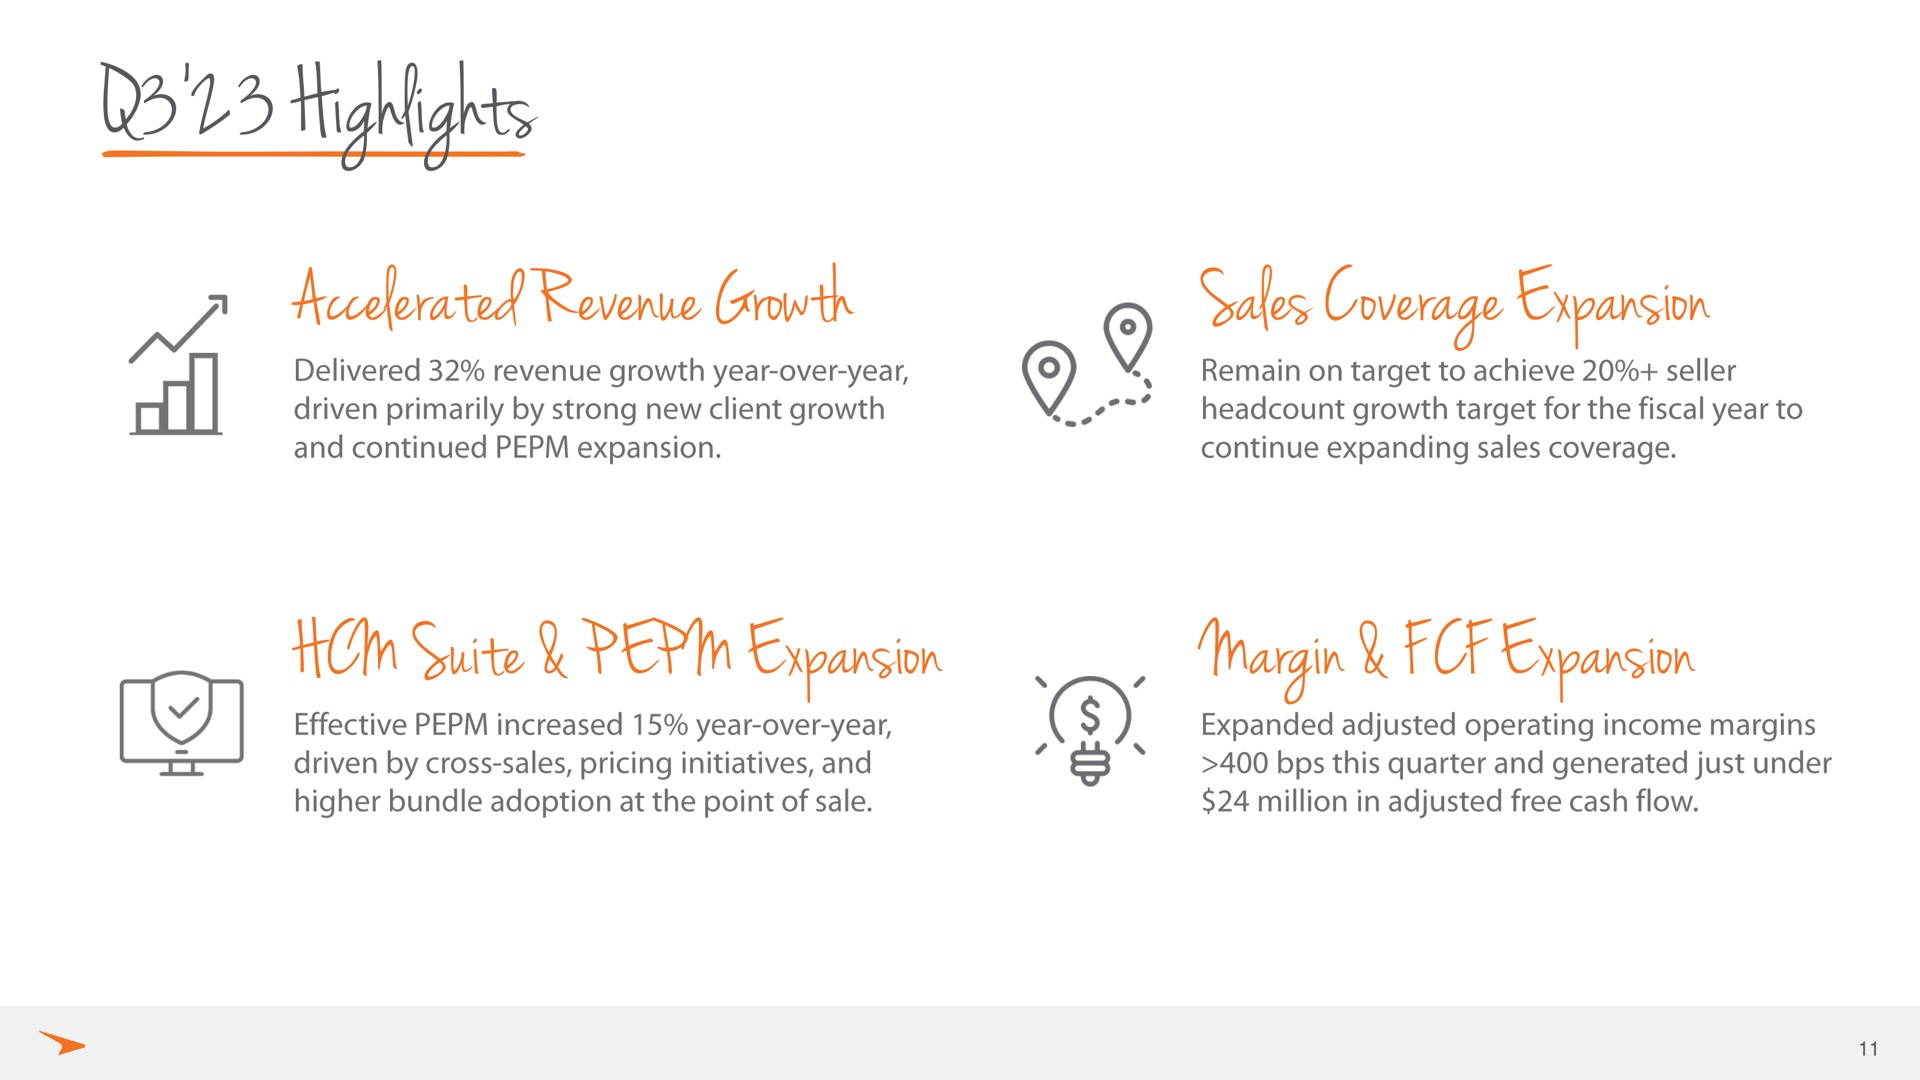 highlights accelerated revenue growth sales coverage expansion suite expansion margin expansion | Paycor